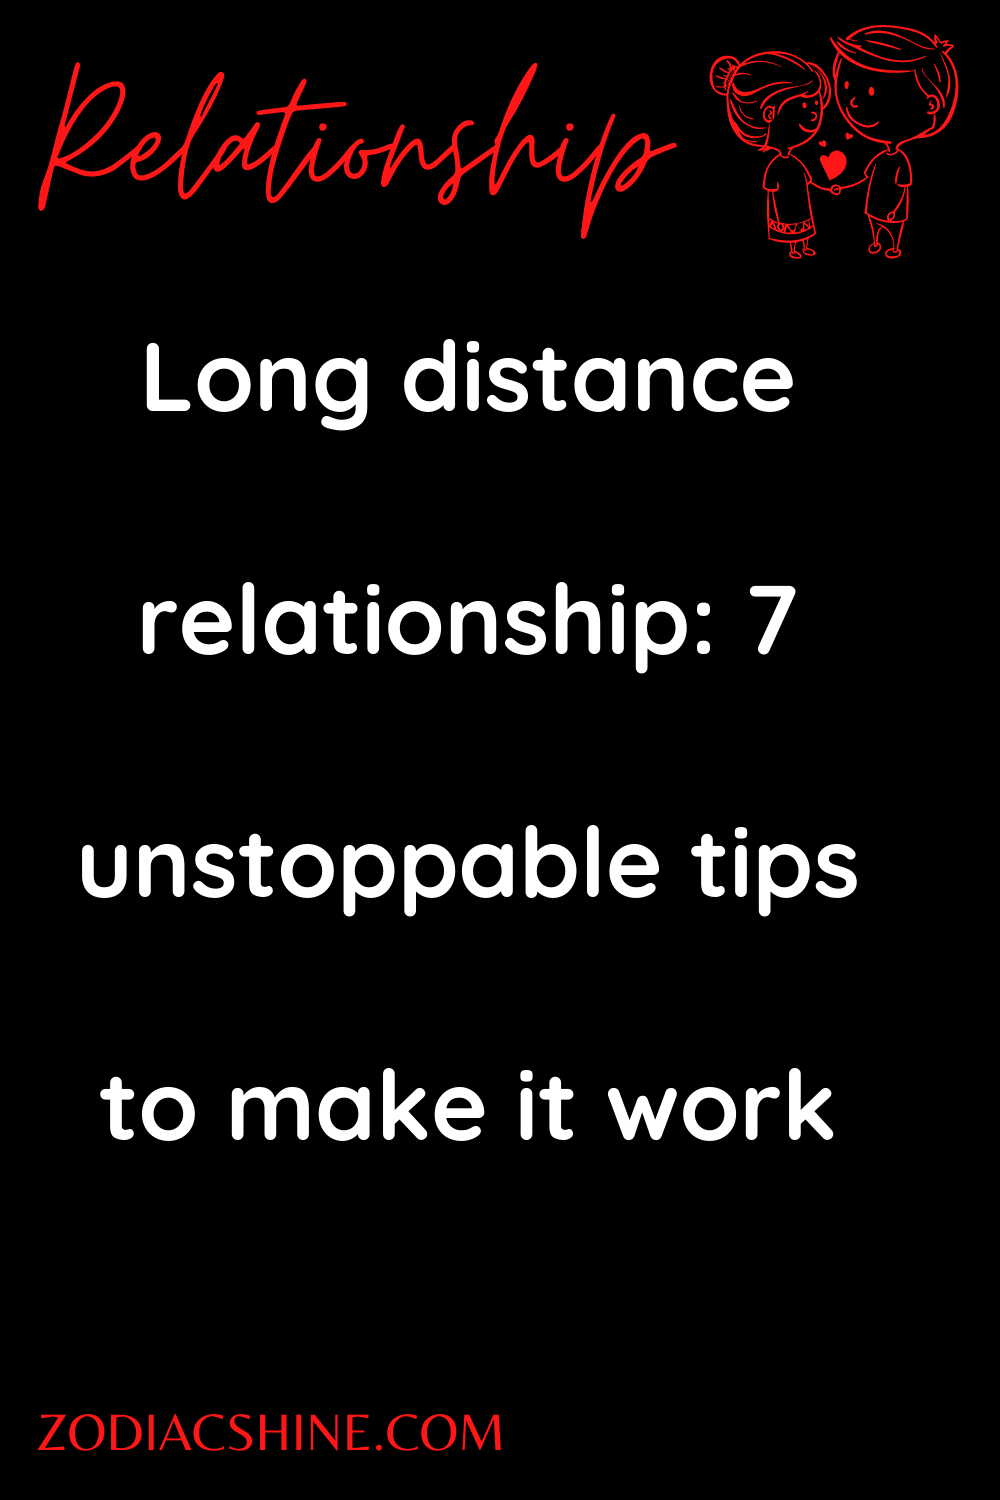 Long distance relationship: 7 unstoppable tips to make it work